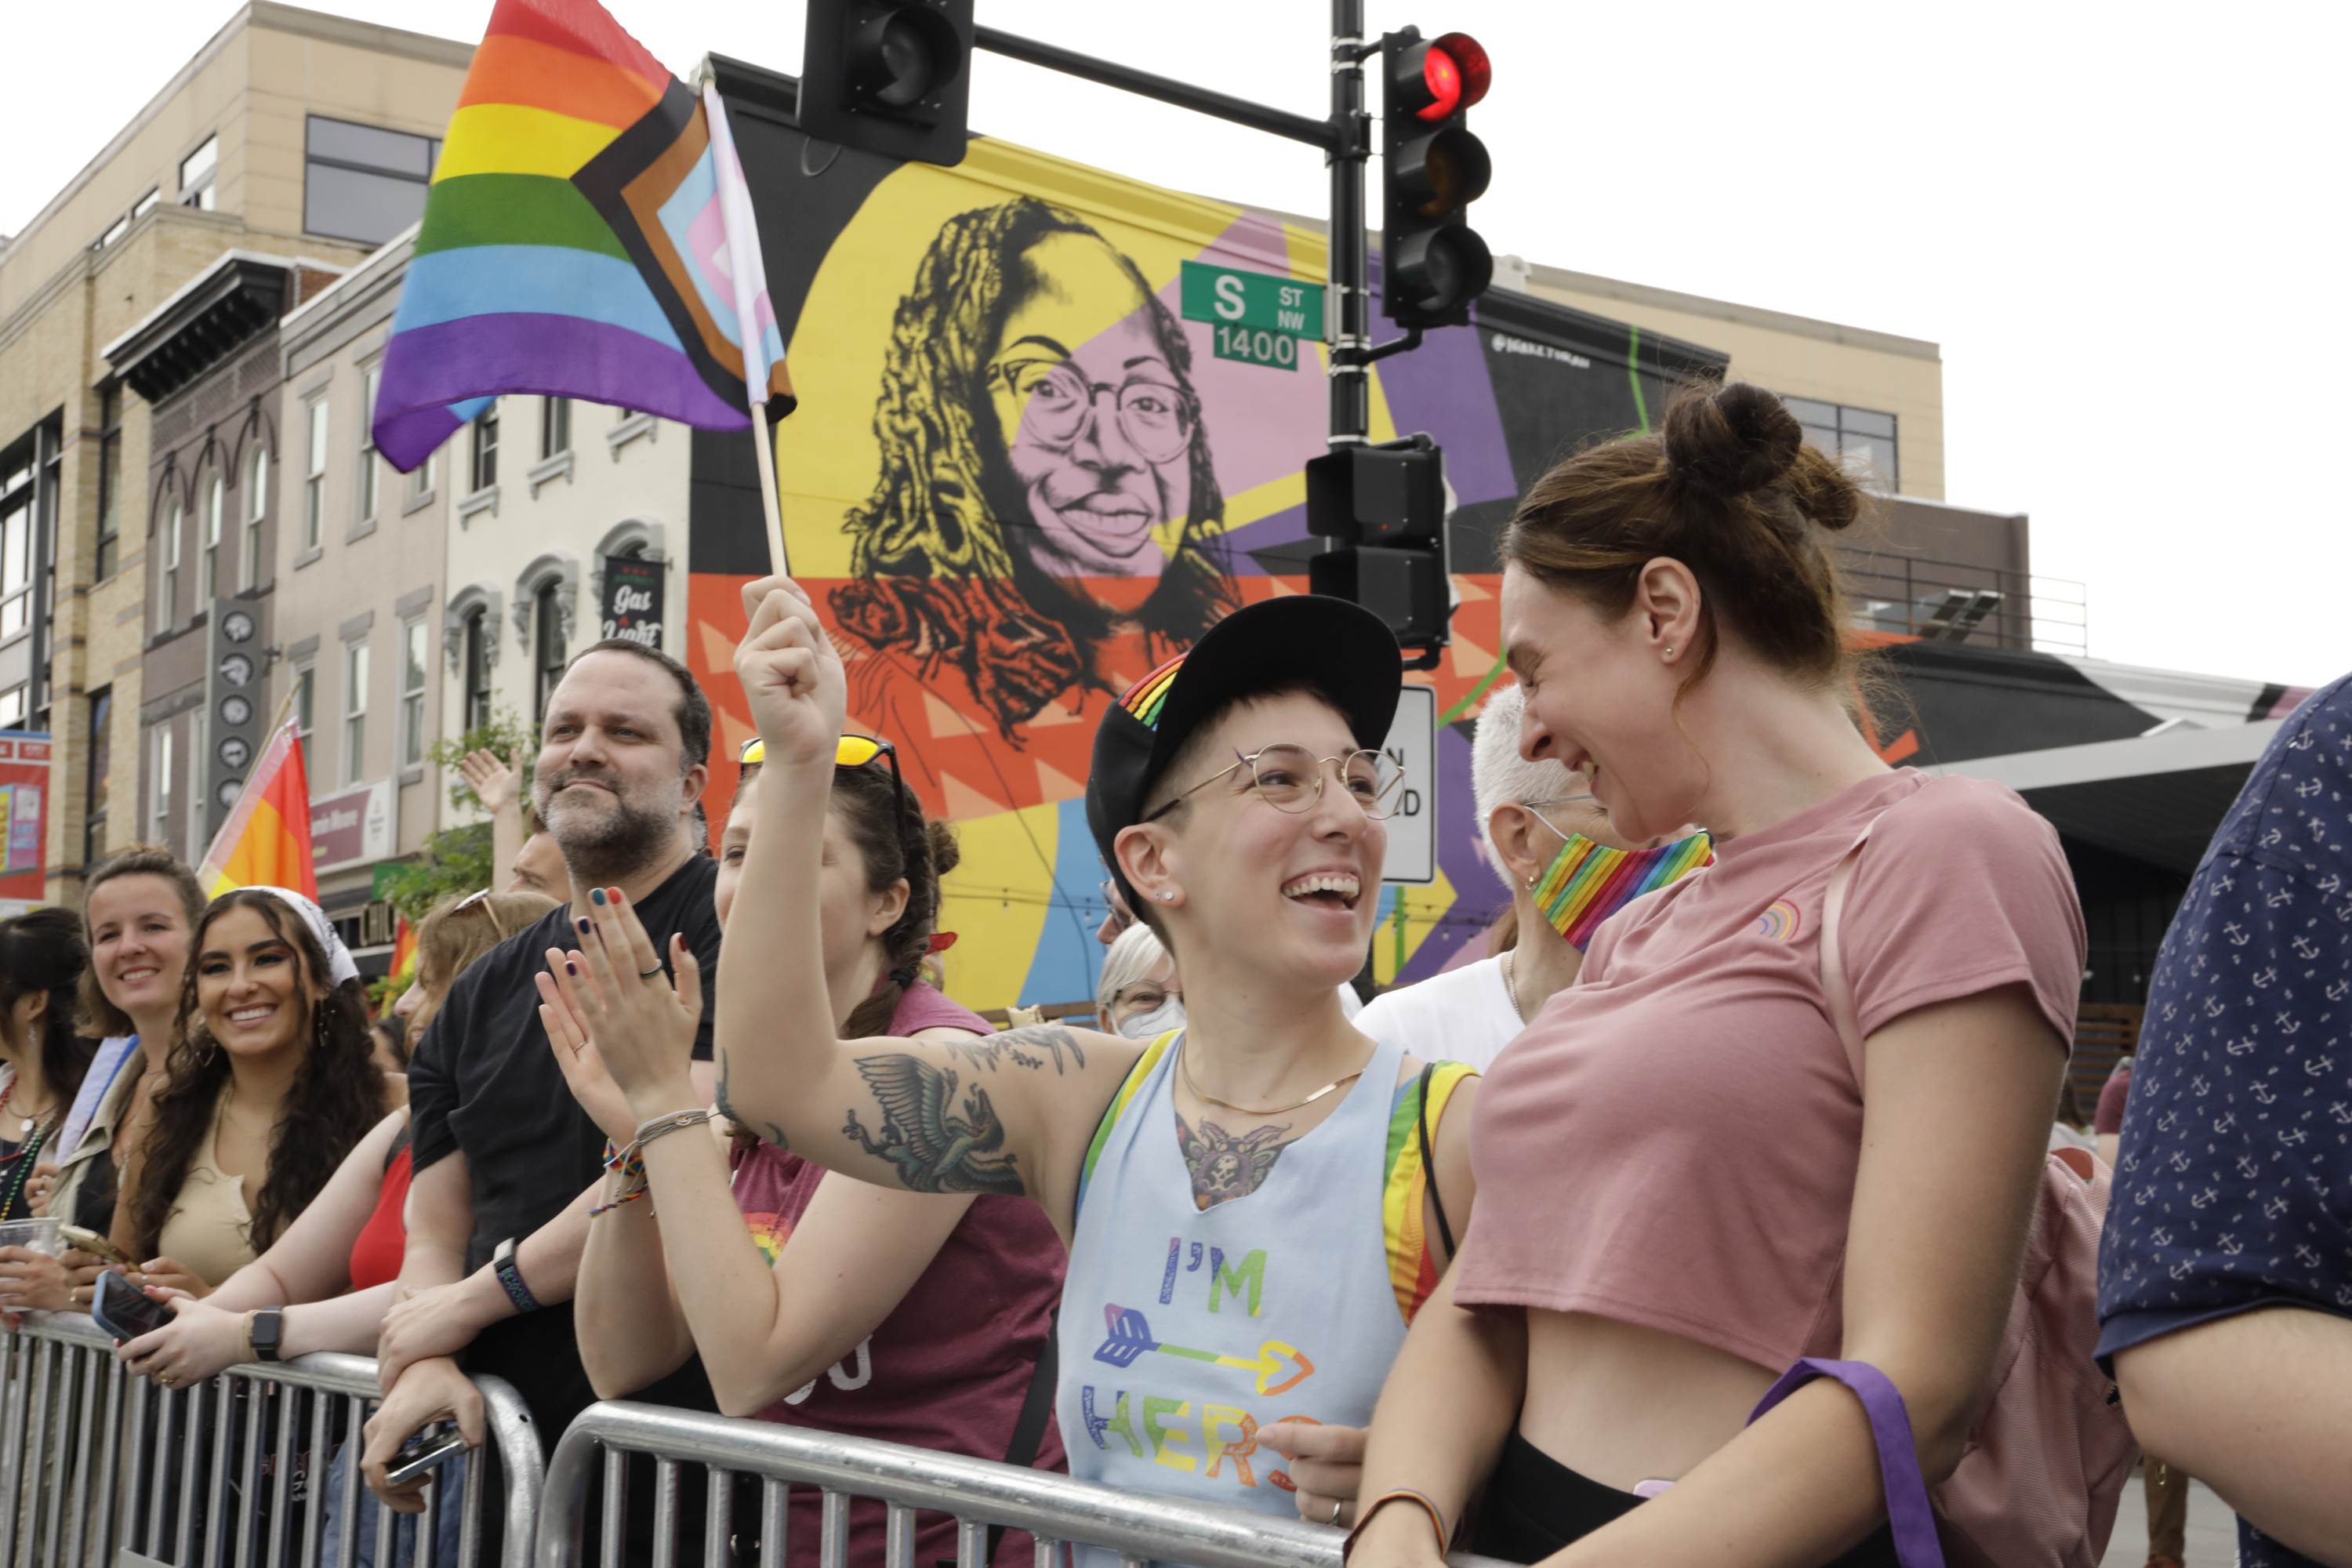 Photos: Colors fly with spirits high at Arlington Pride, Gallery